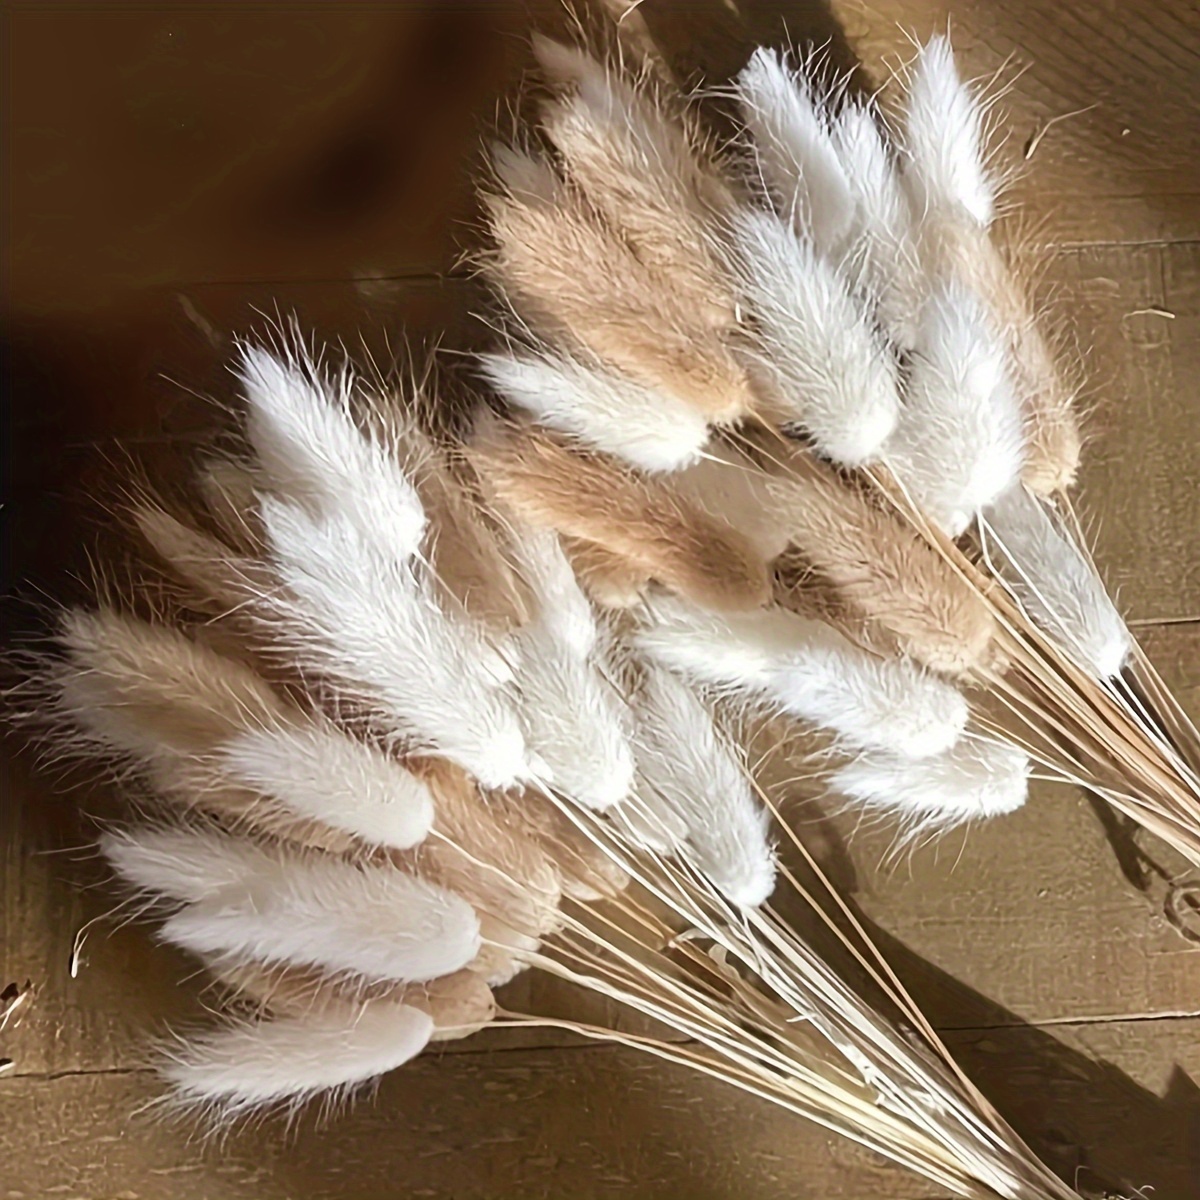 

60-piece Boho Chic Bunny Tail Grass Bouquet - Fluffy Lagurus Ovatus Dried Flowers For Home Decor, Vase Filler, Wedding & Party Accents Instant Coziness - Warm Up Any Space